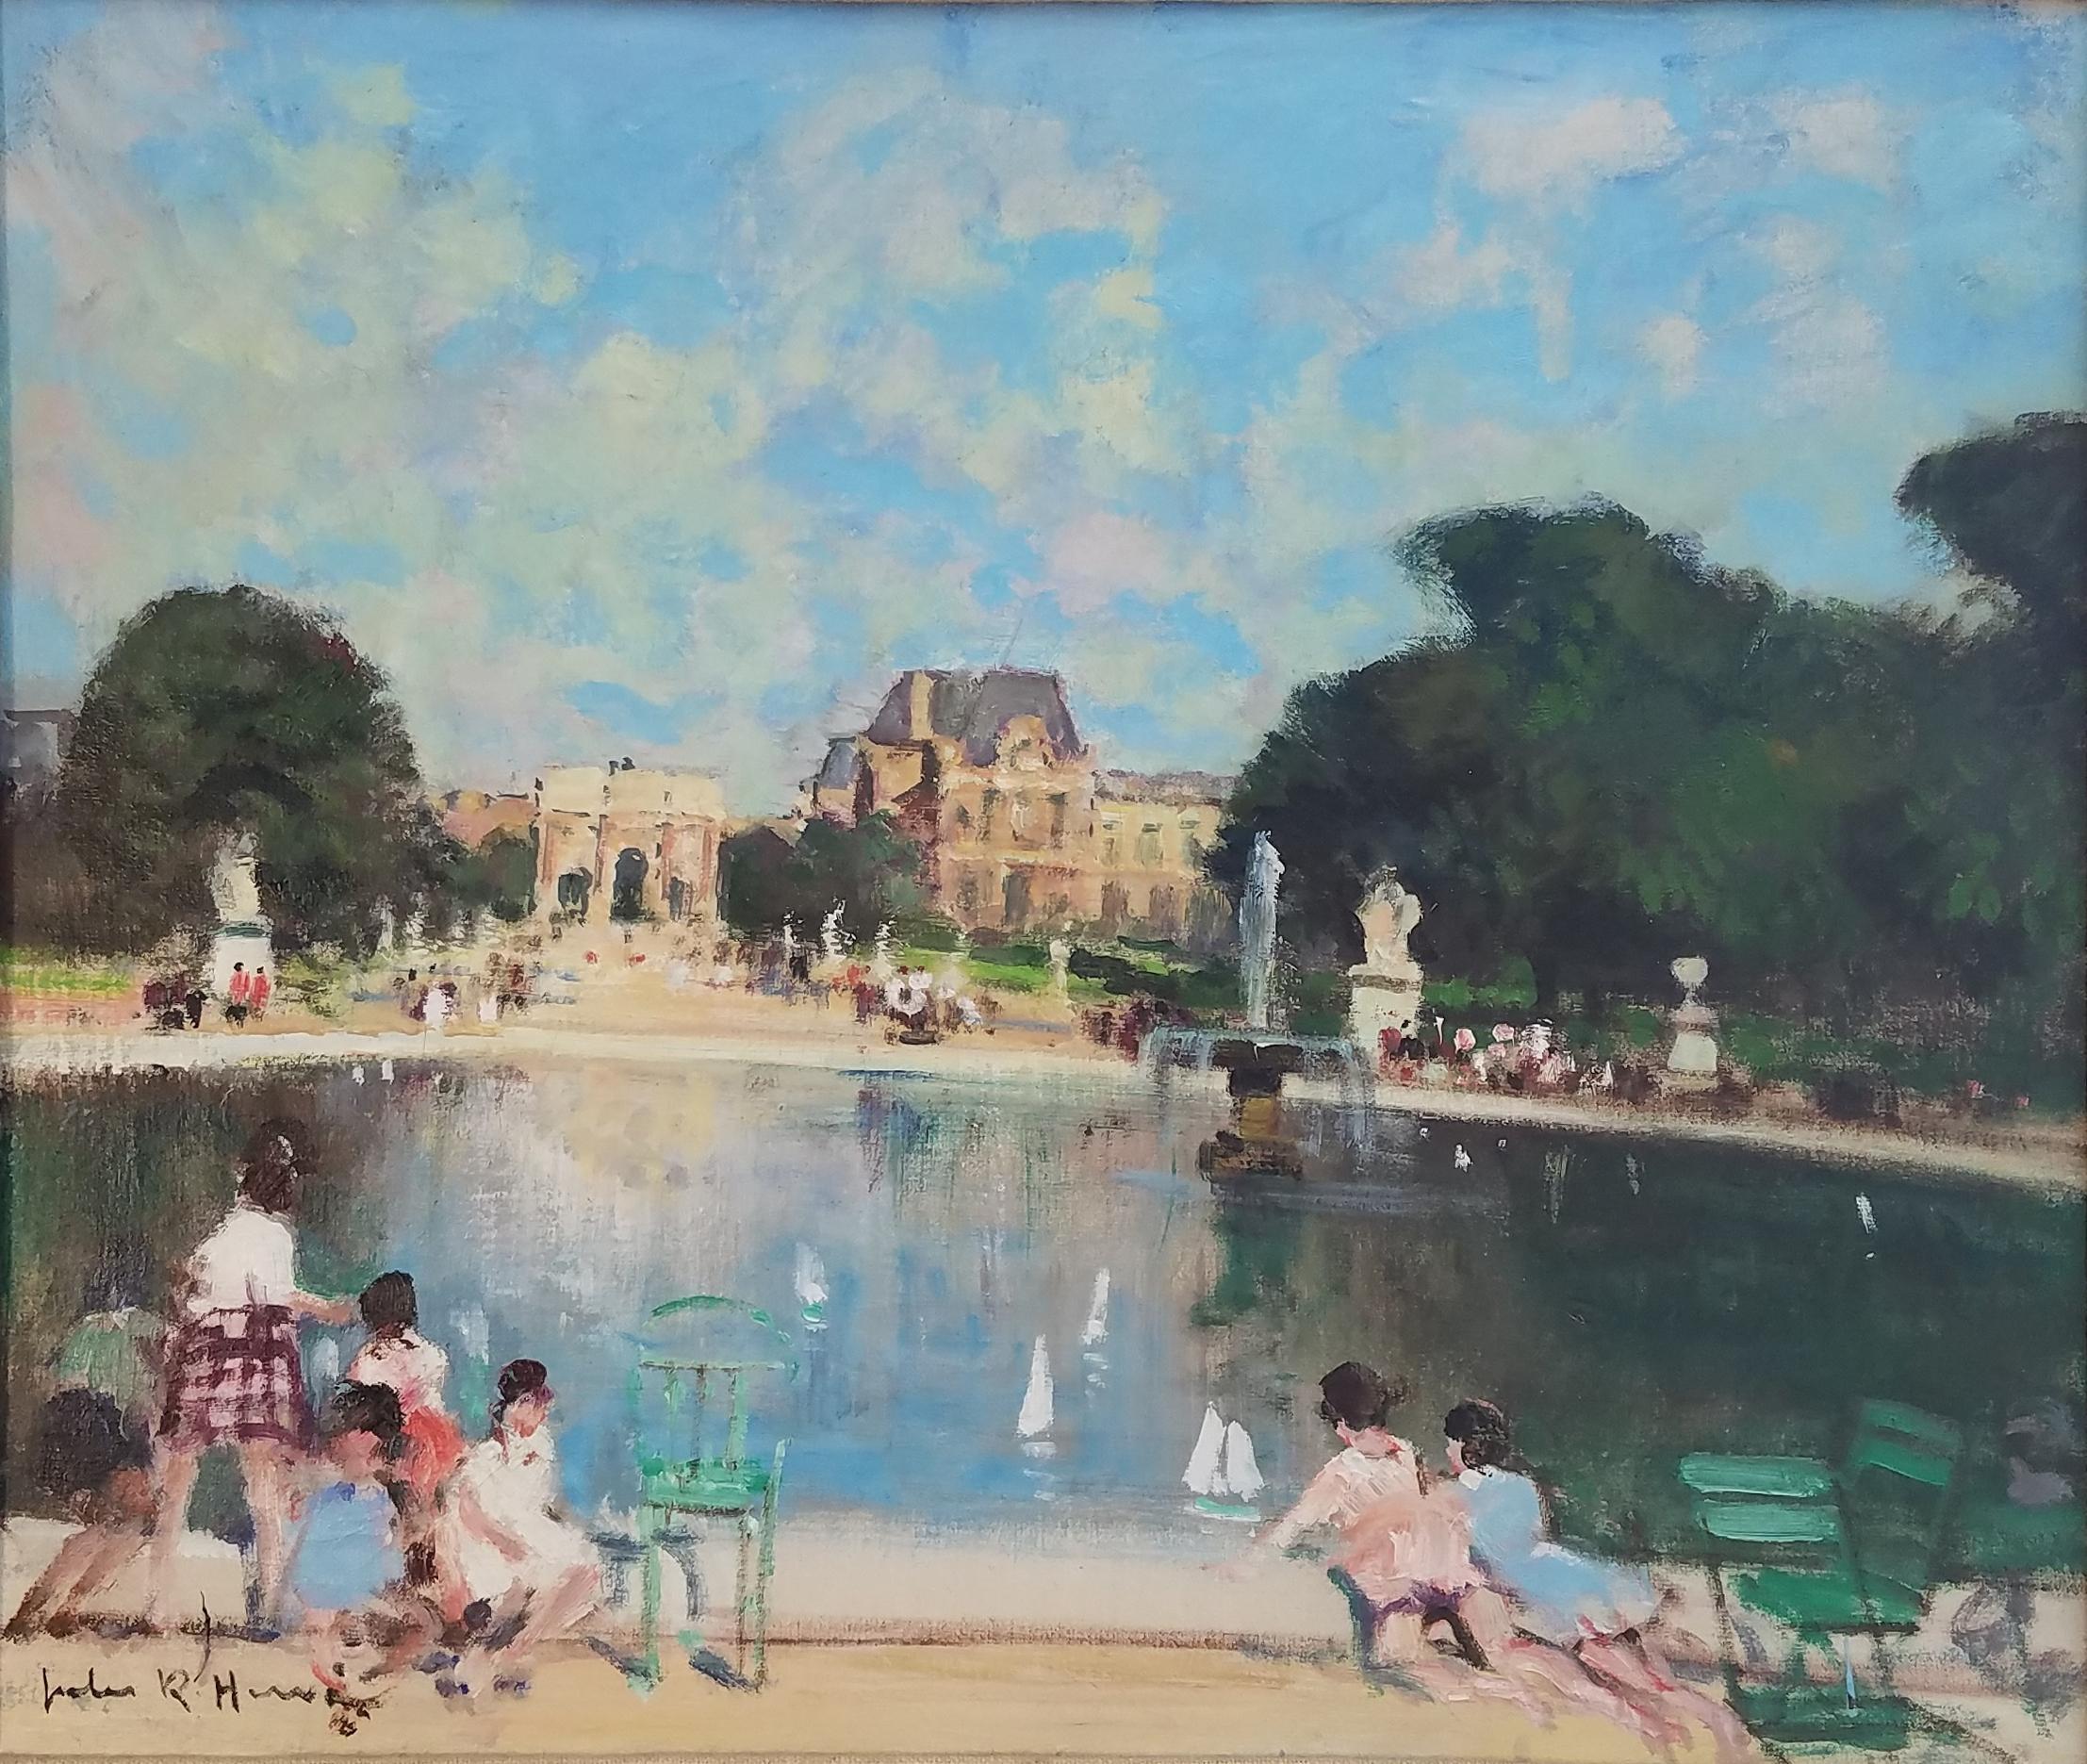 "Bassin des Tuilleries and the Louvre, Paris," Jules Herve, French Impressionism